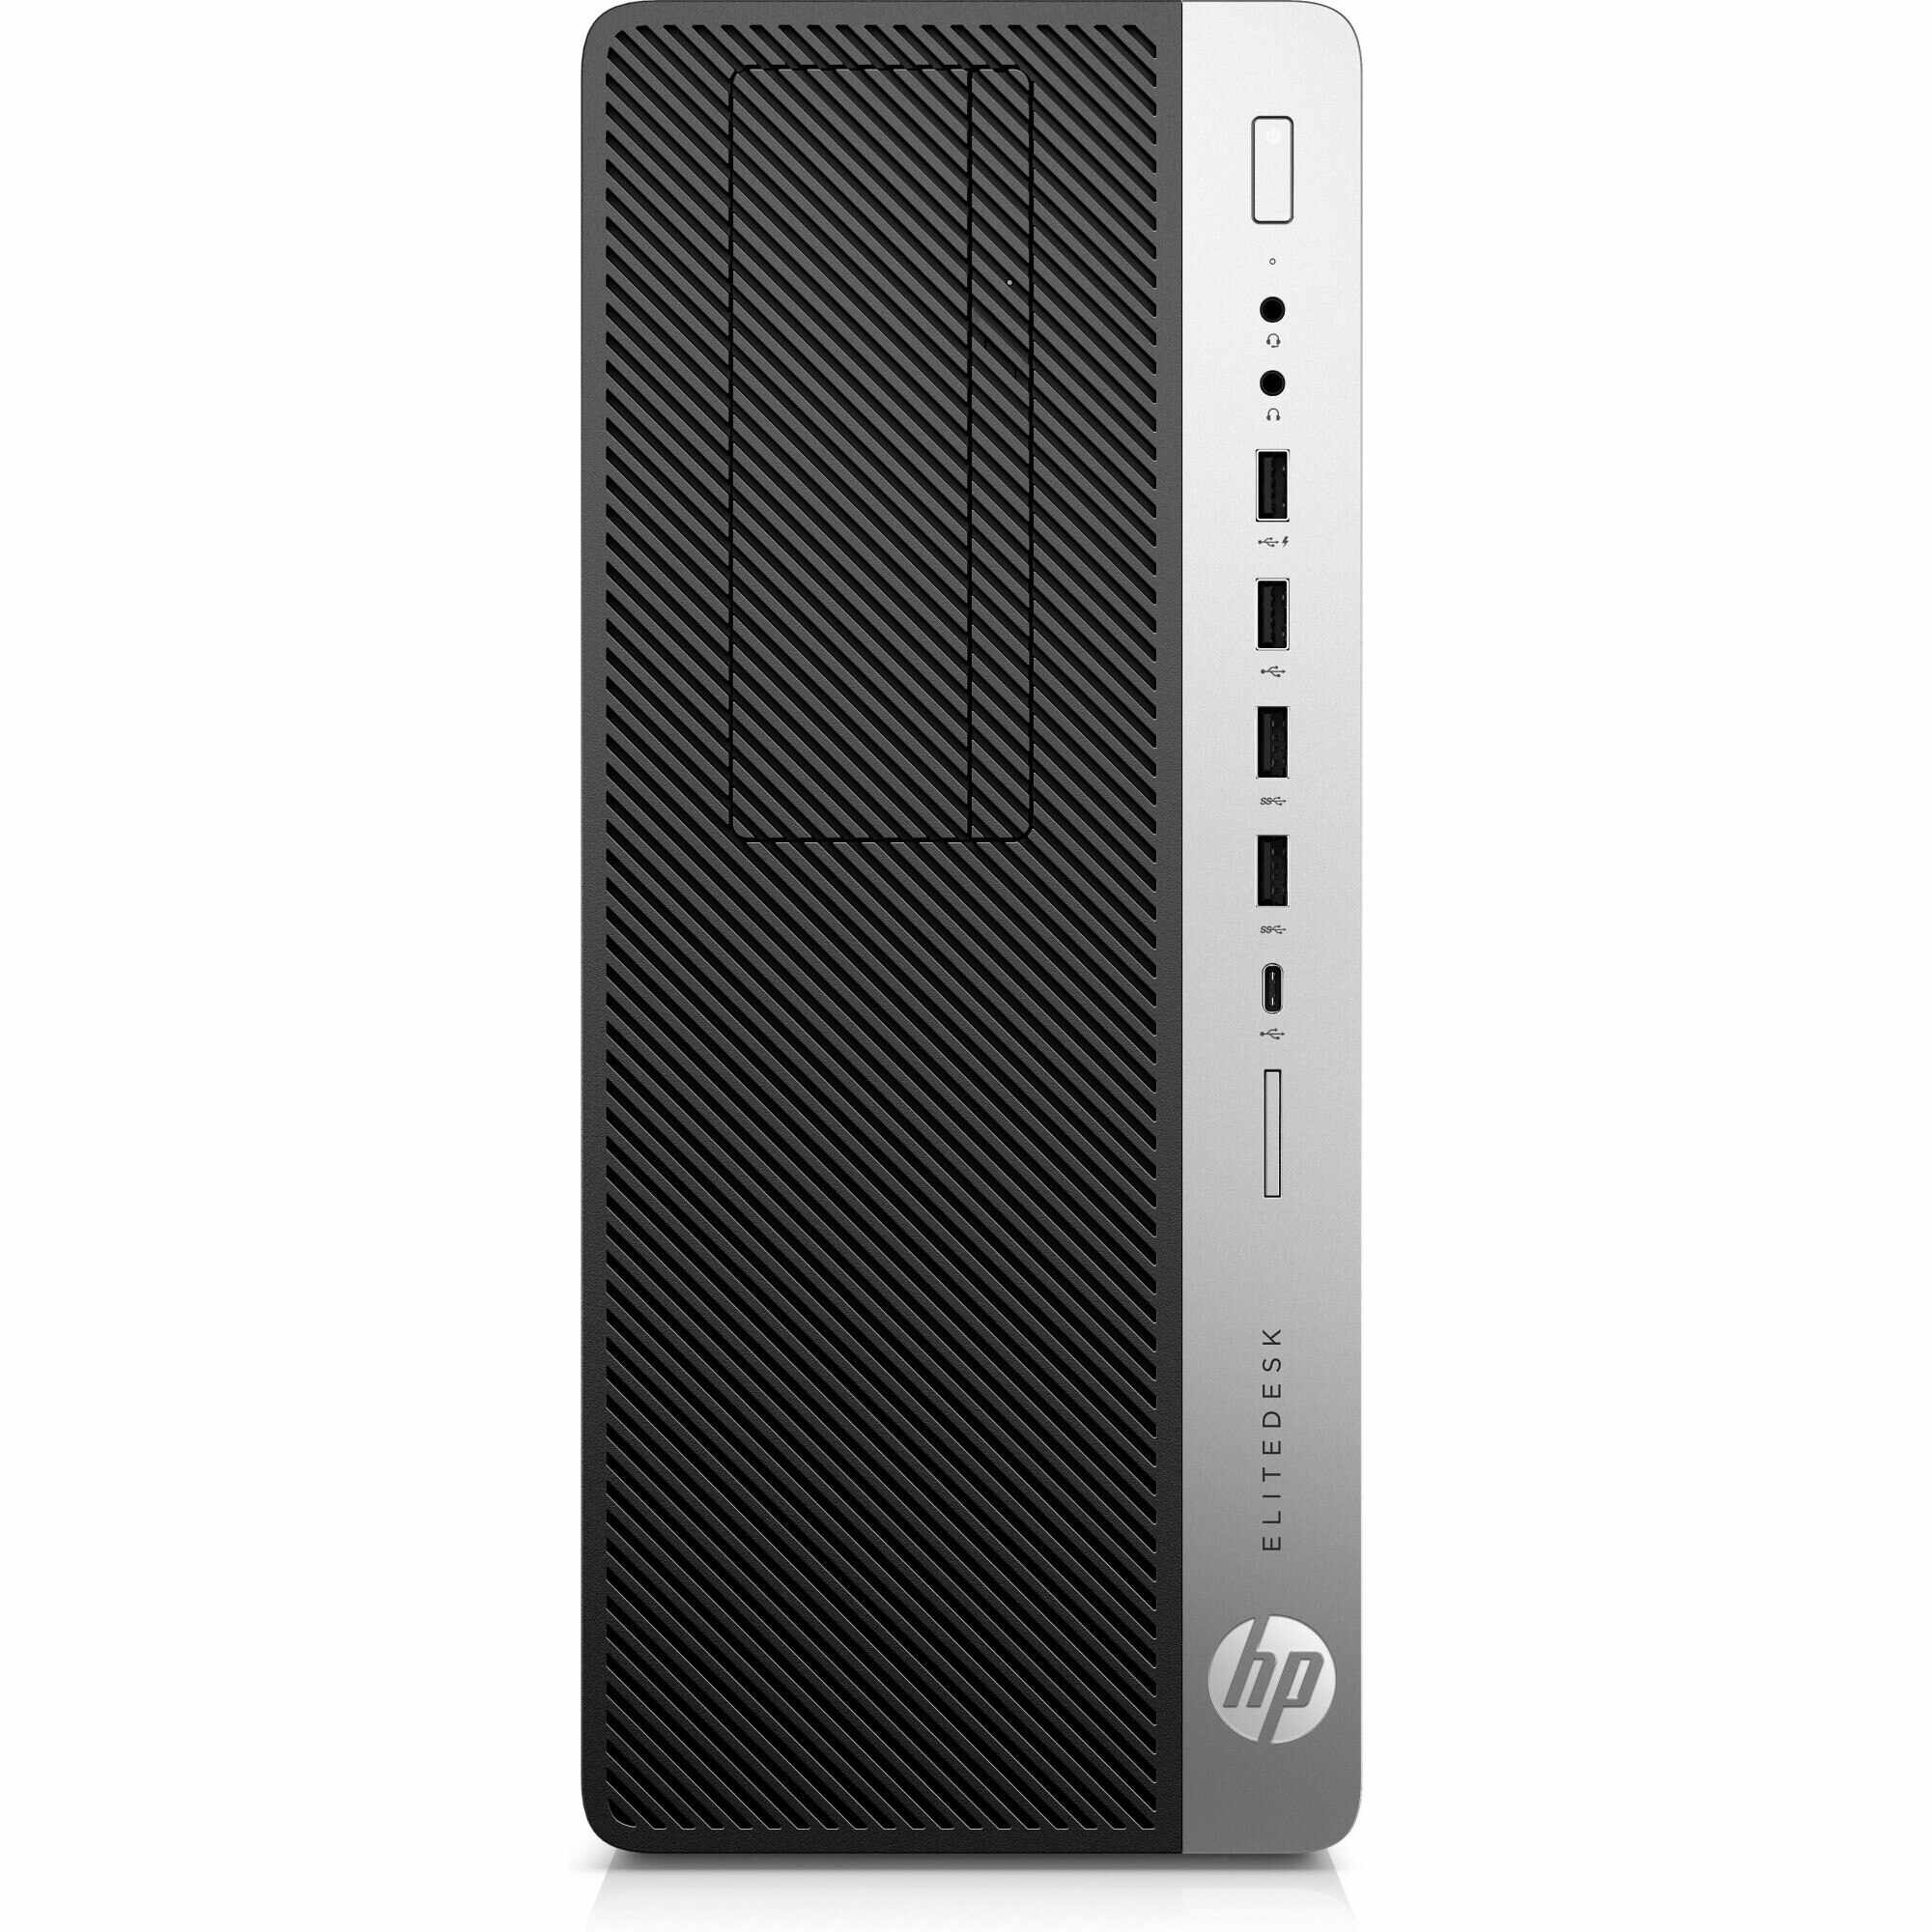 PC Second Hand HP 800 G4 Tower, Intel Core i5-8500 3.00GHz, 8GB DDR4, 480GB SSD